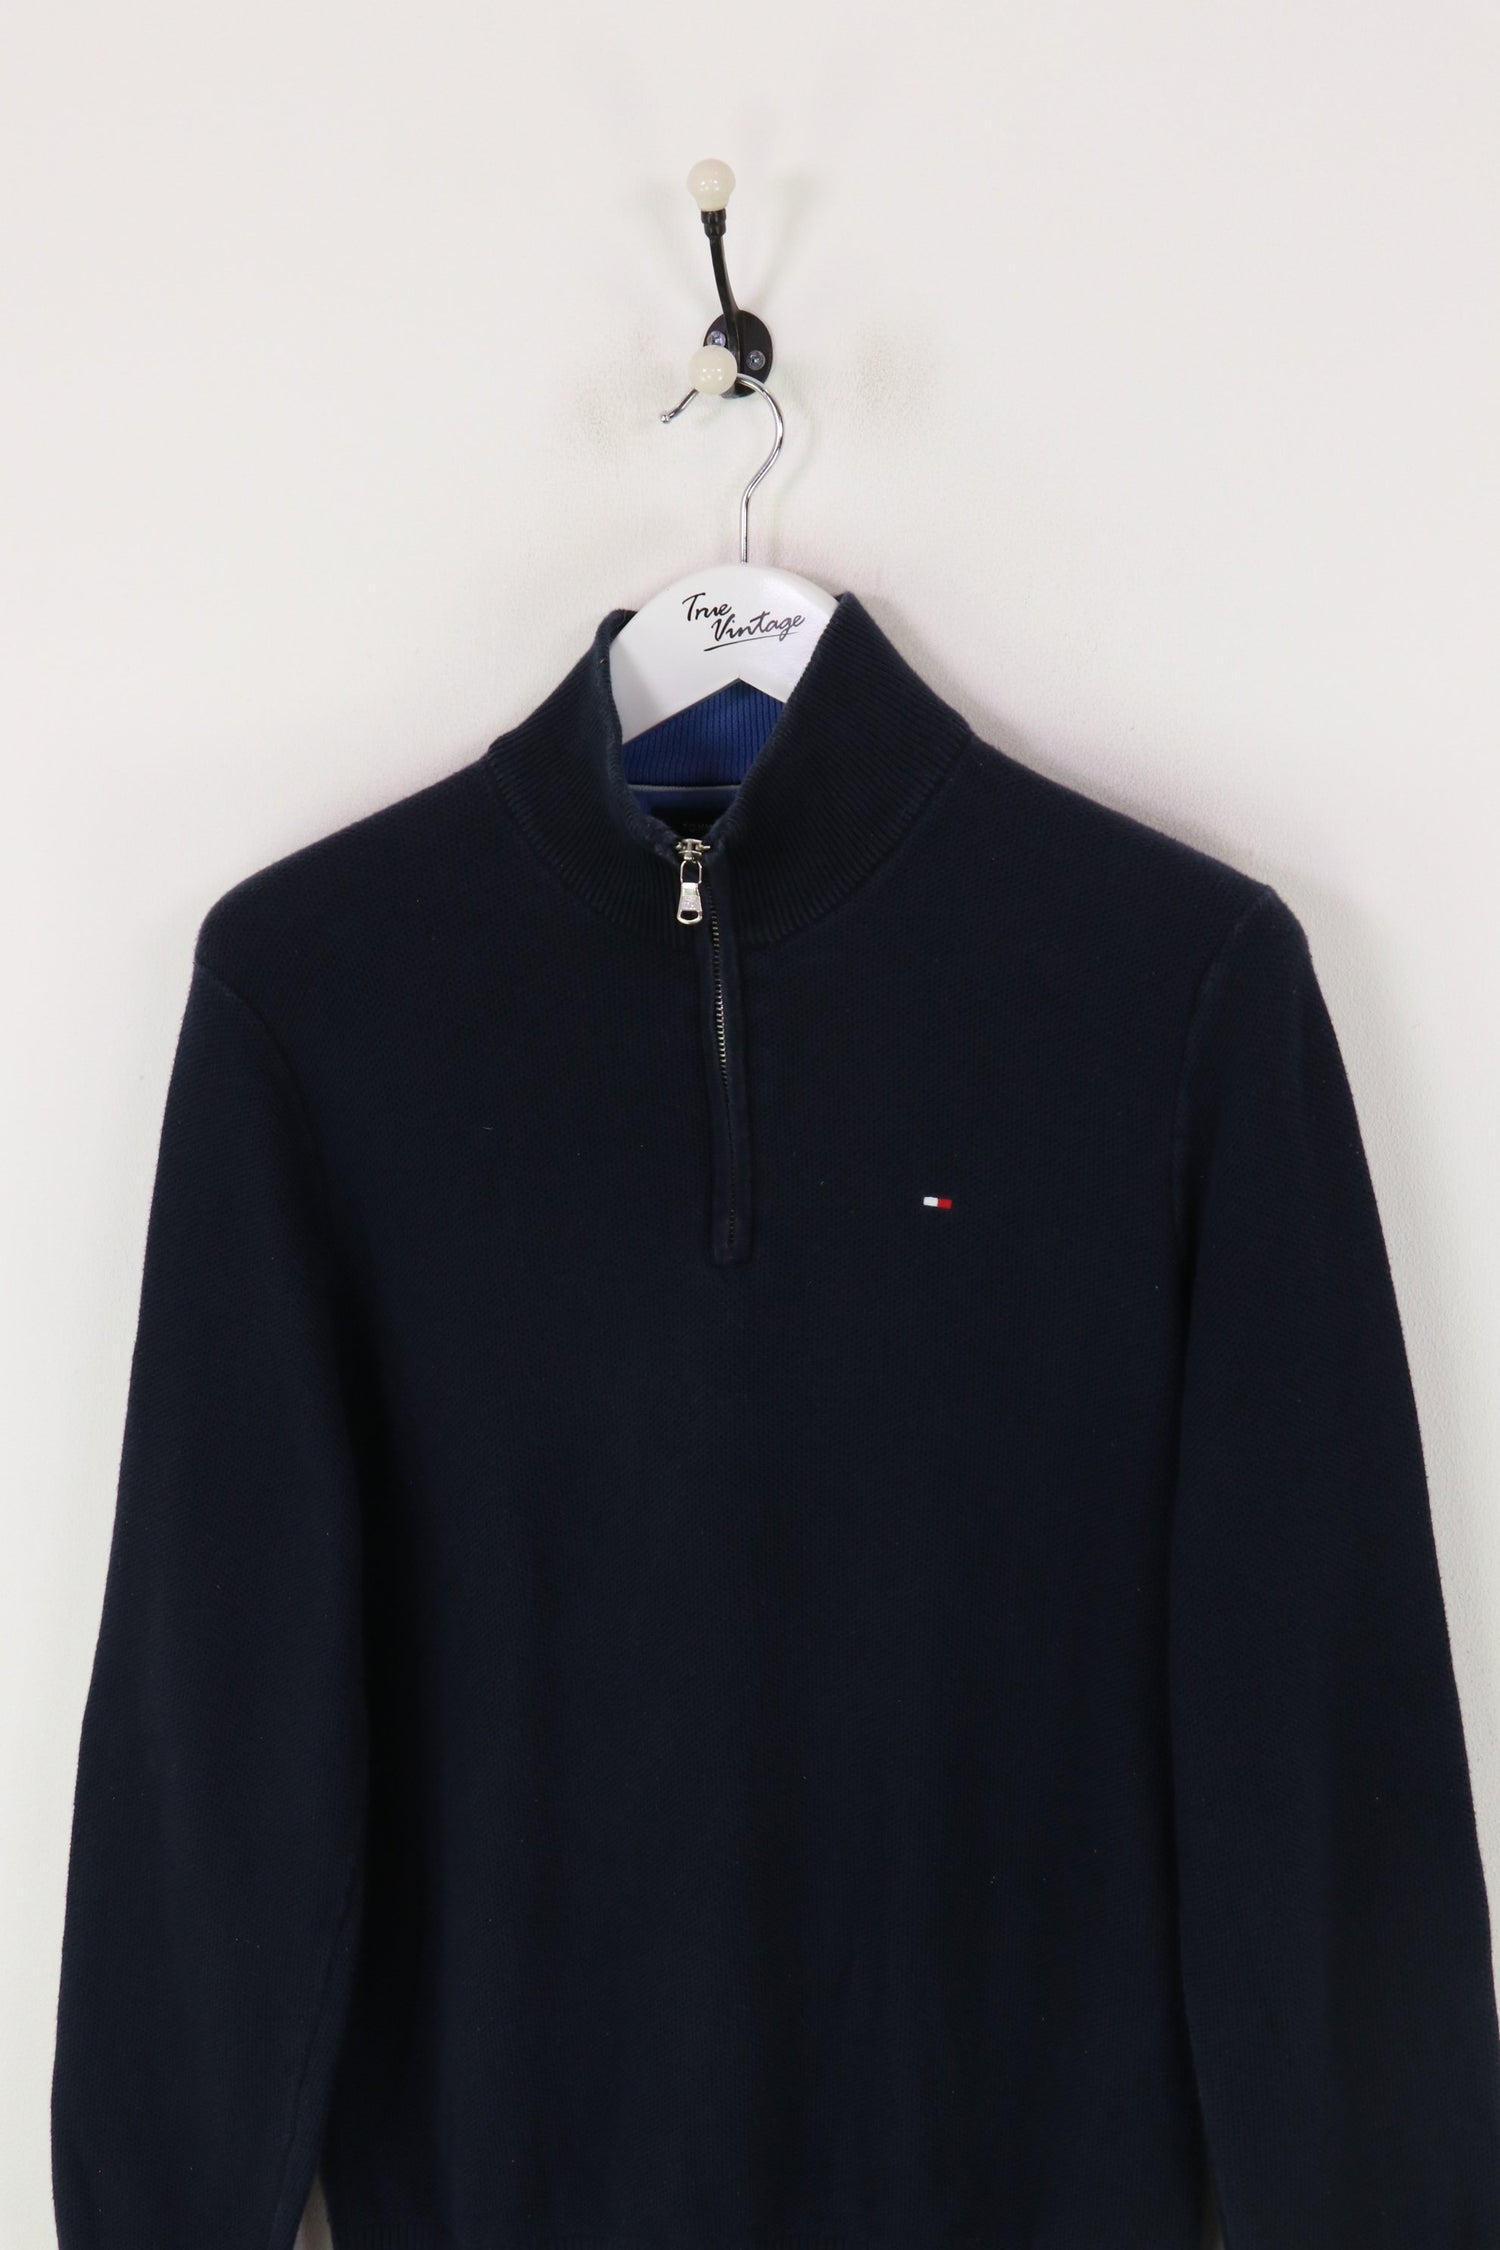 Tommy Hilfiger Knitted 1/4 Zip Sweatshirt Navy Small